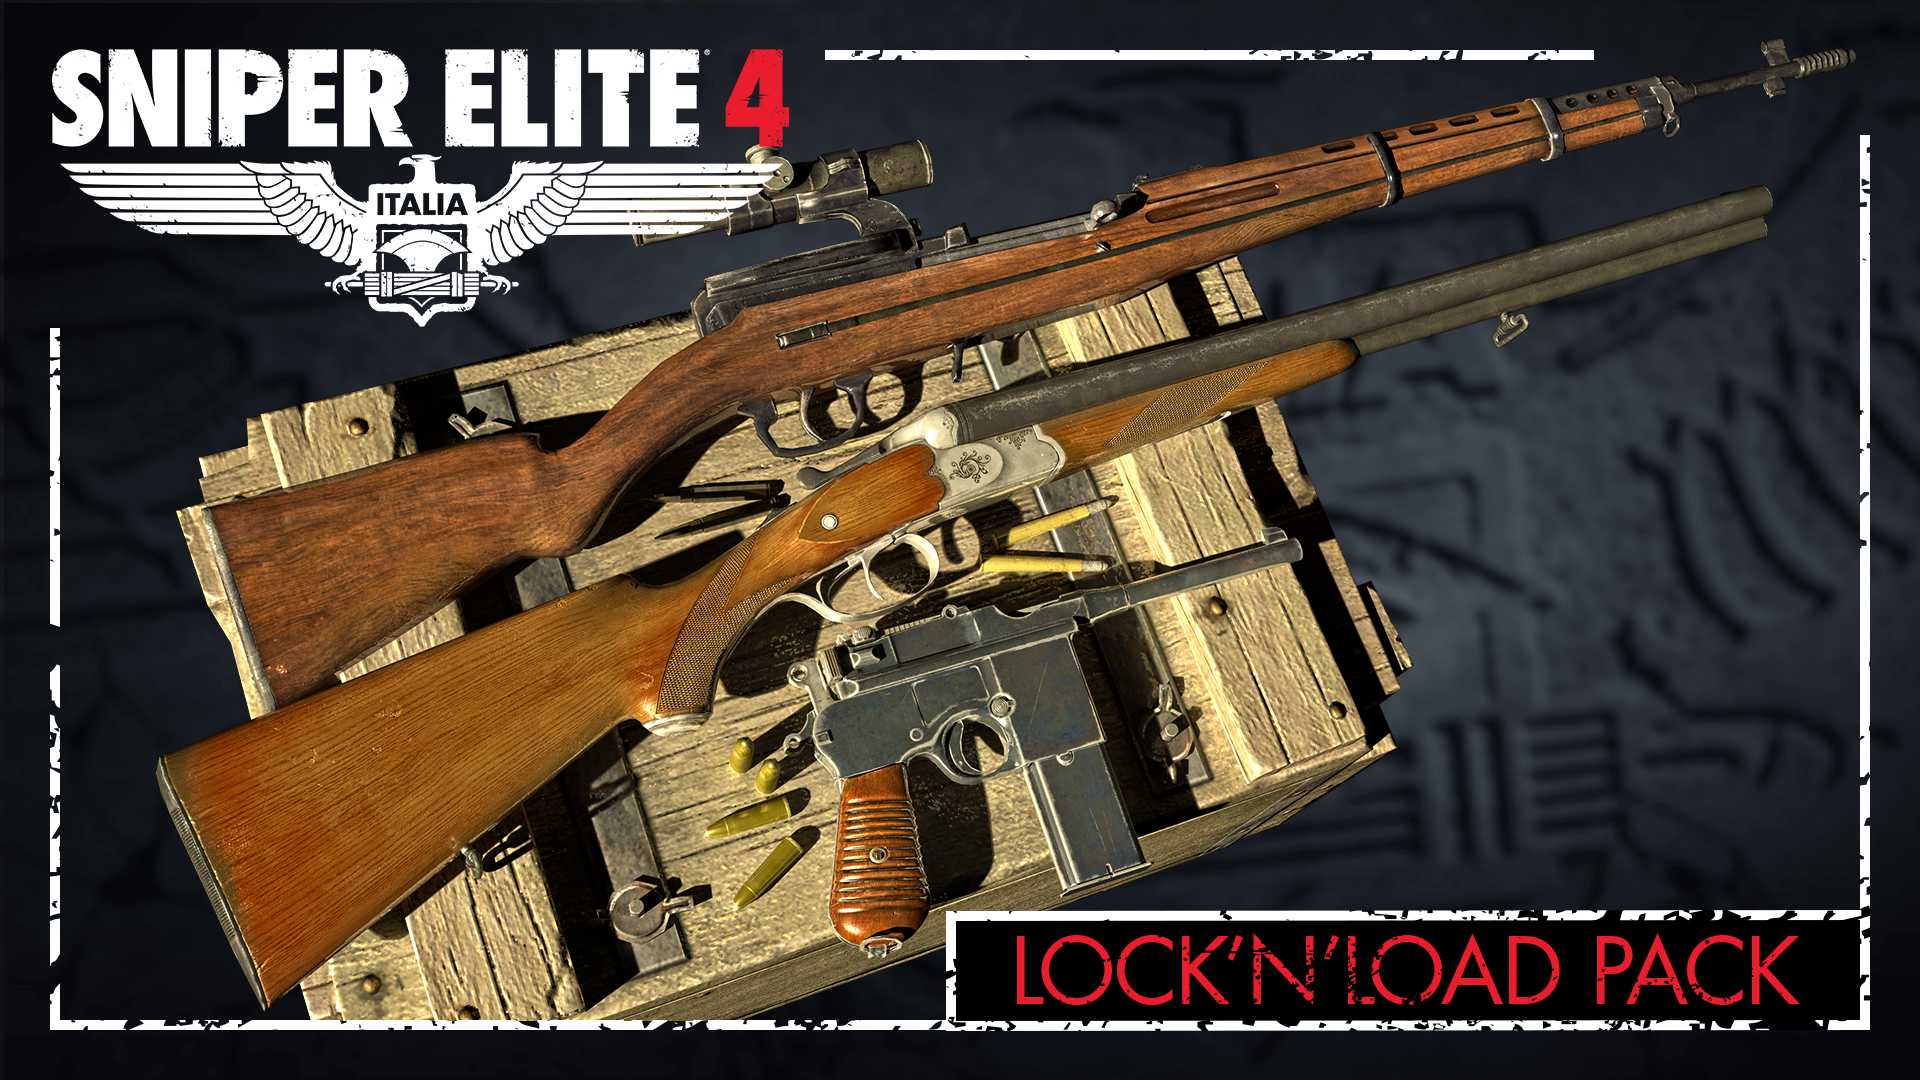 Sniper Elite 4 - Lock and Load Weapons Pack DLC Steam CD Key [$ 4.51]